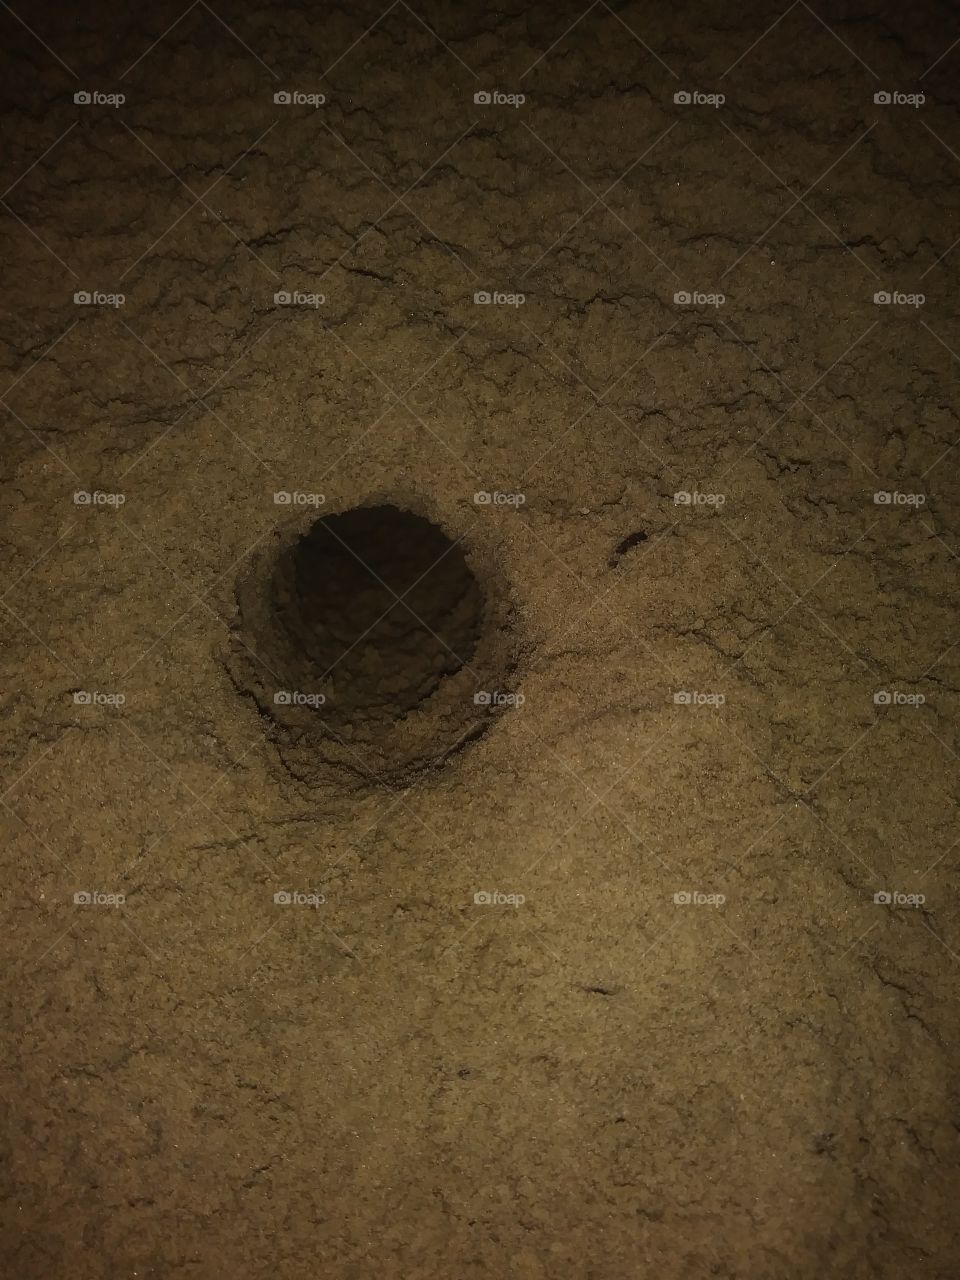 this photograph is a close up of a crawdad hole on the beach at night